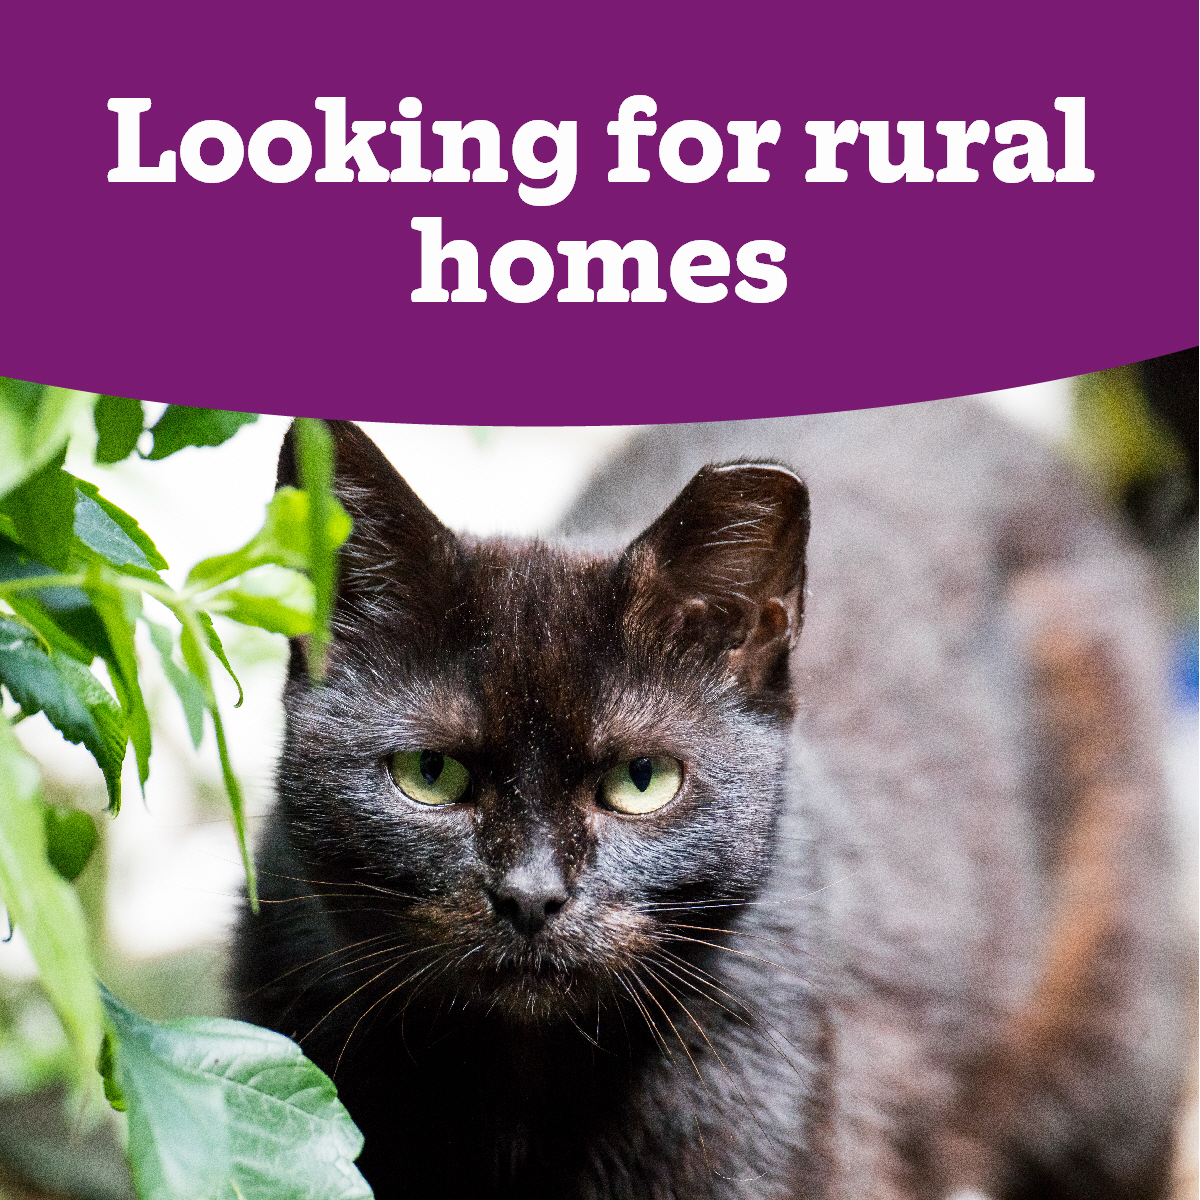 We are looking for outdoor homes for feral cats in the Norfolk, Suffolk and Essex regions. They need rural properties with access to shelter and food. If you think you could give them a home please email: enquiries@framandsax.cats.org.uk